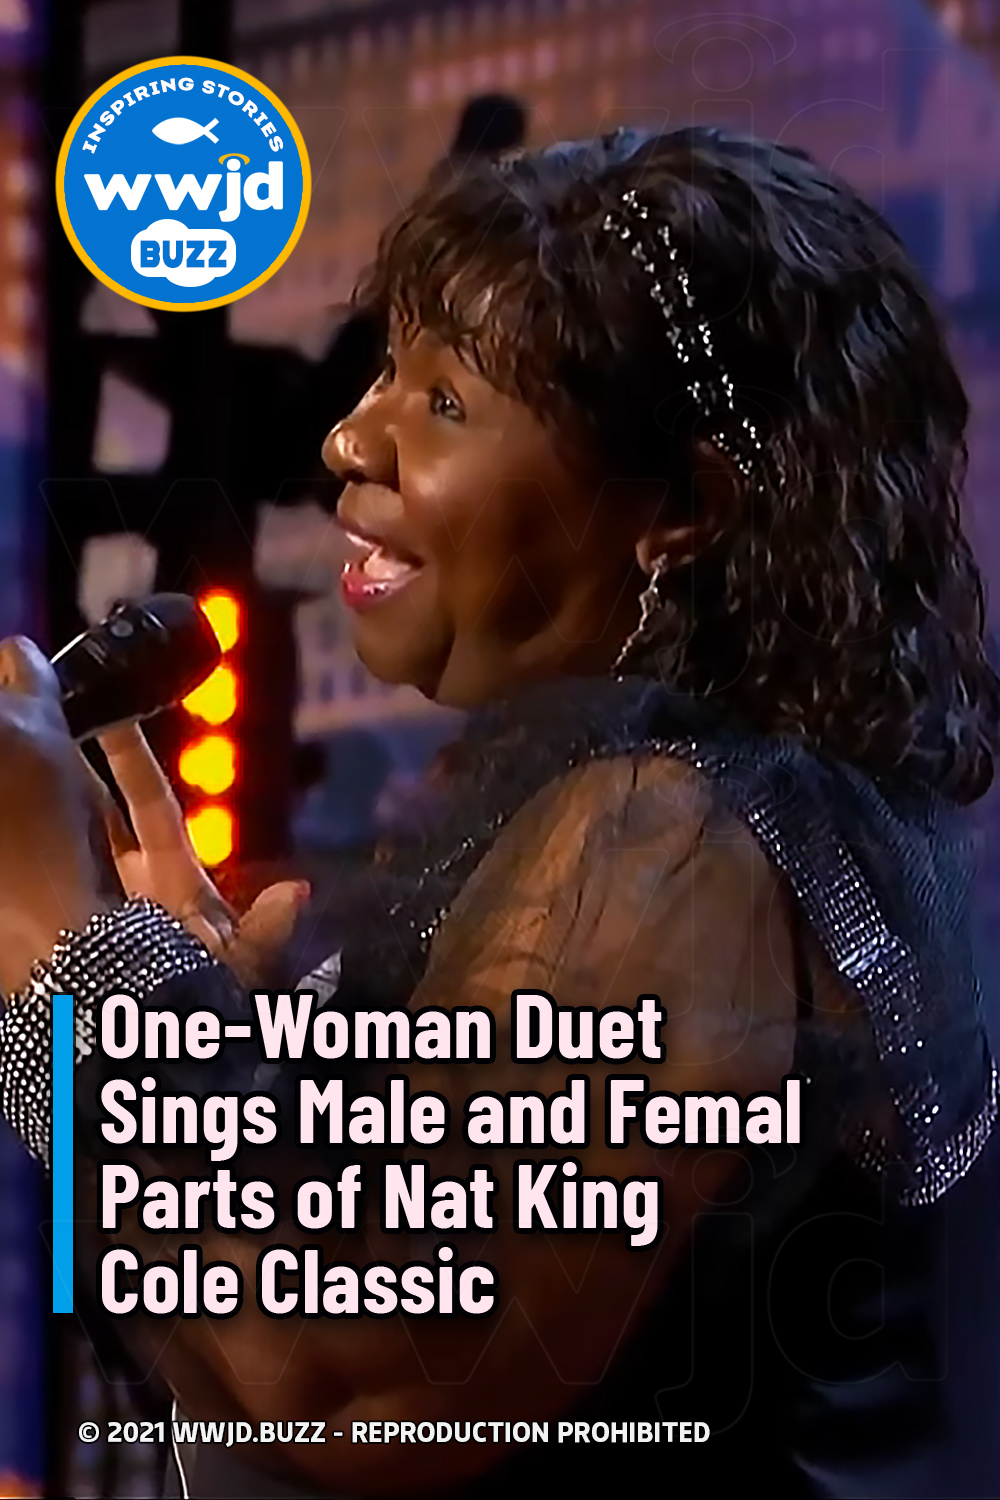 One-Woman Duet Sings Male and Female Parts of Nat King Cole Classic